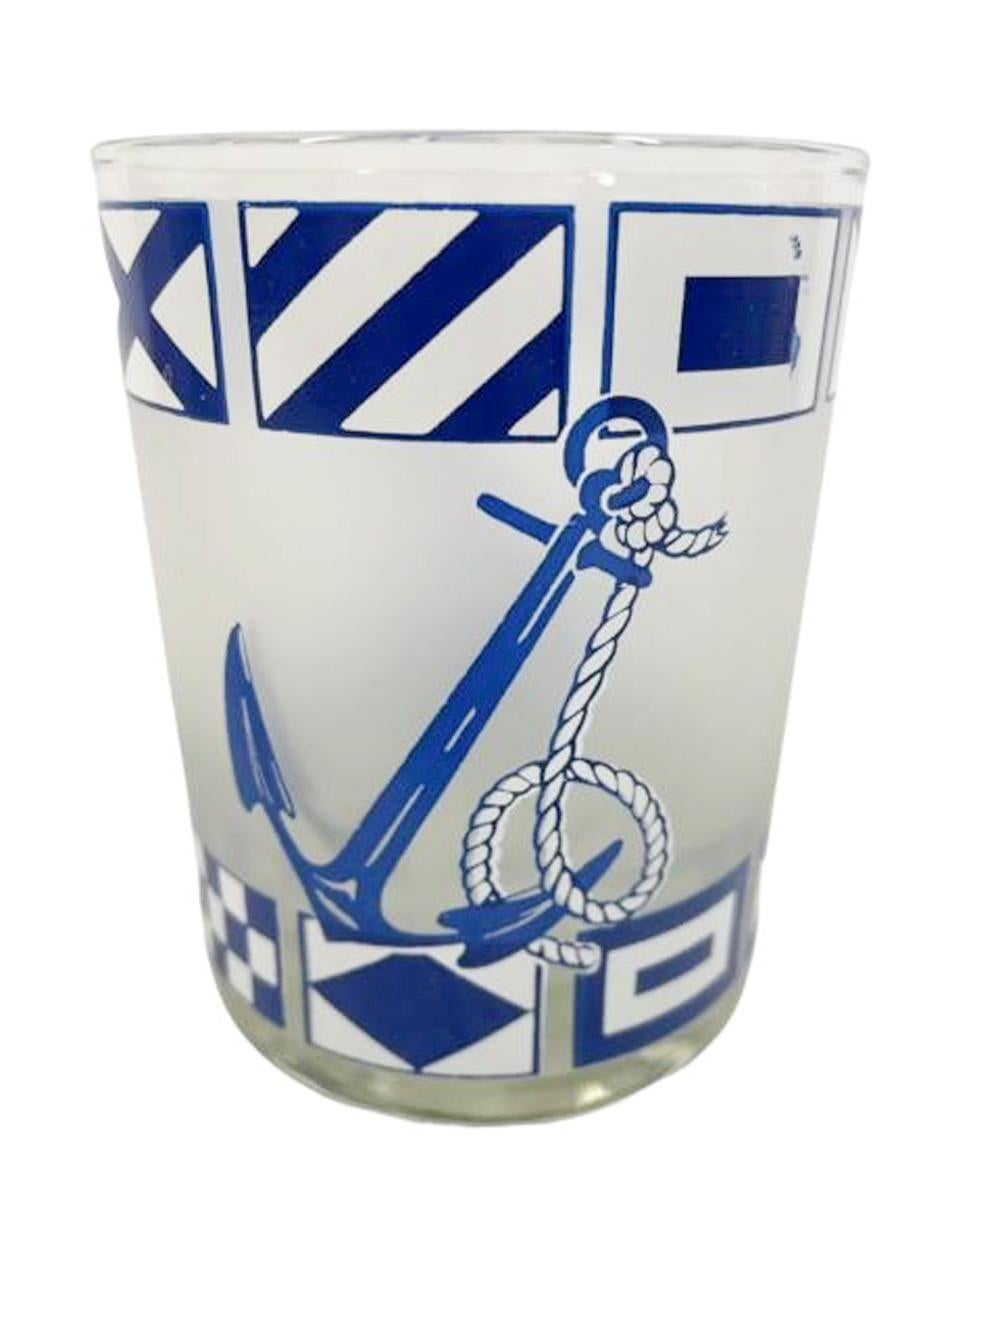 Six mid-century rocks glasses decorated in blue and white having large anchors between two bands of nautical flags all on a frosted ground.